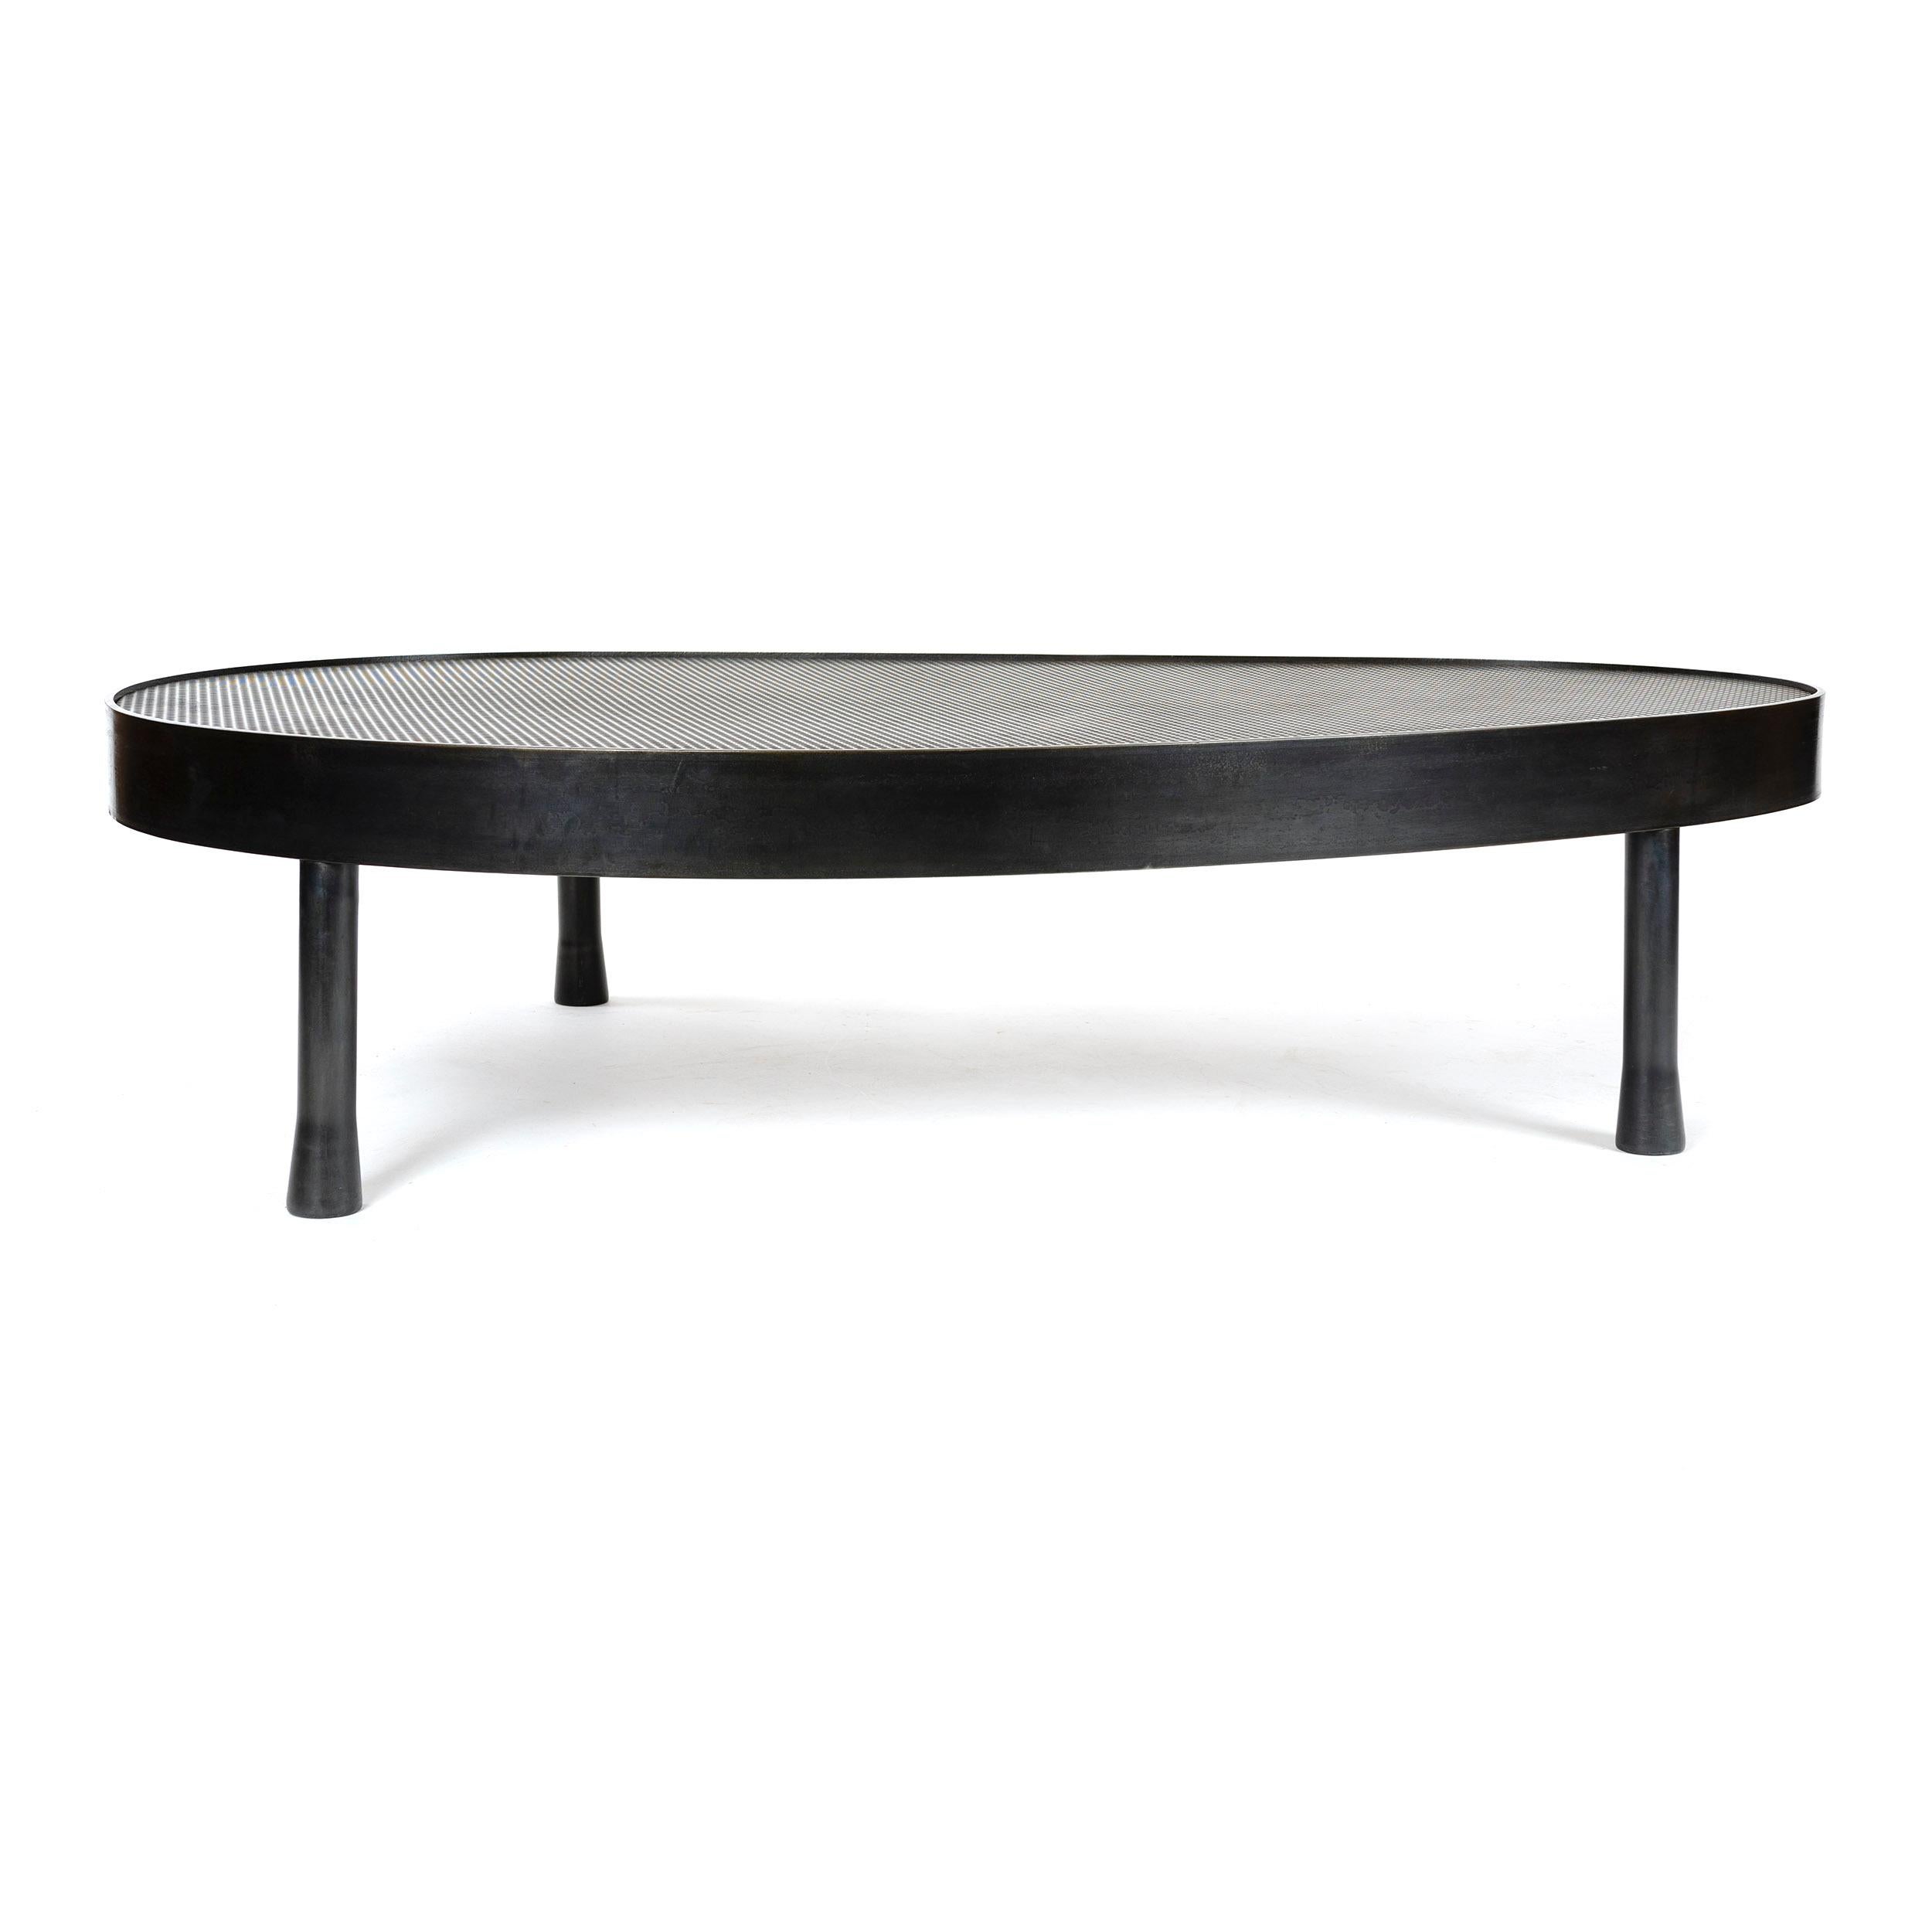 A low perforated steel coffee / cocktail table, supported by a heavy gauge steel band in an ovoid biomorphic shape on three flared tubular legs. 

Available in steel, stainless steel and bronze with surface materials in perforated metals, solid